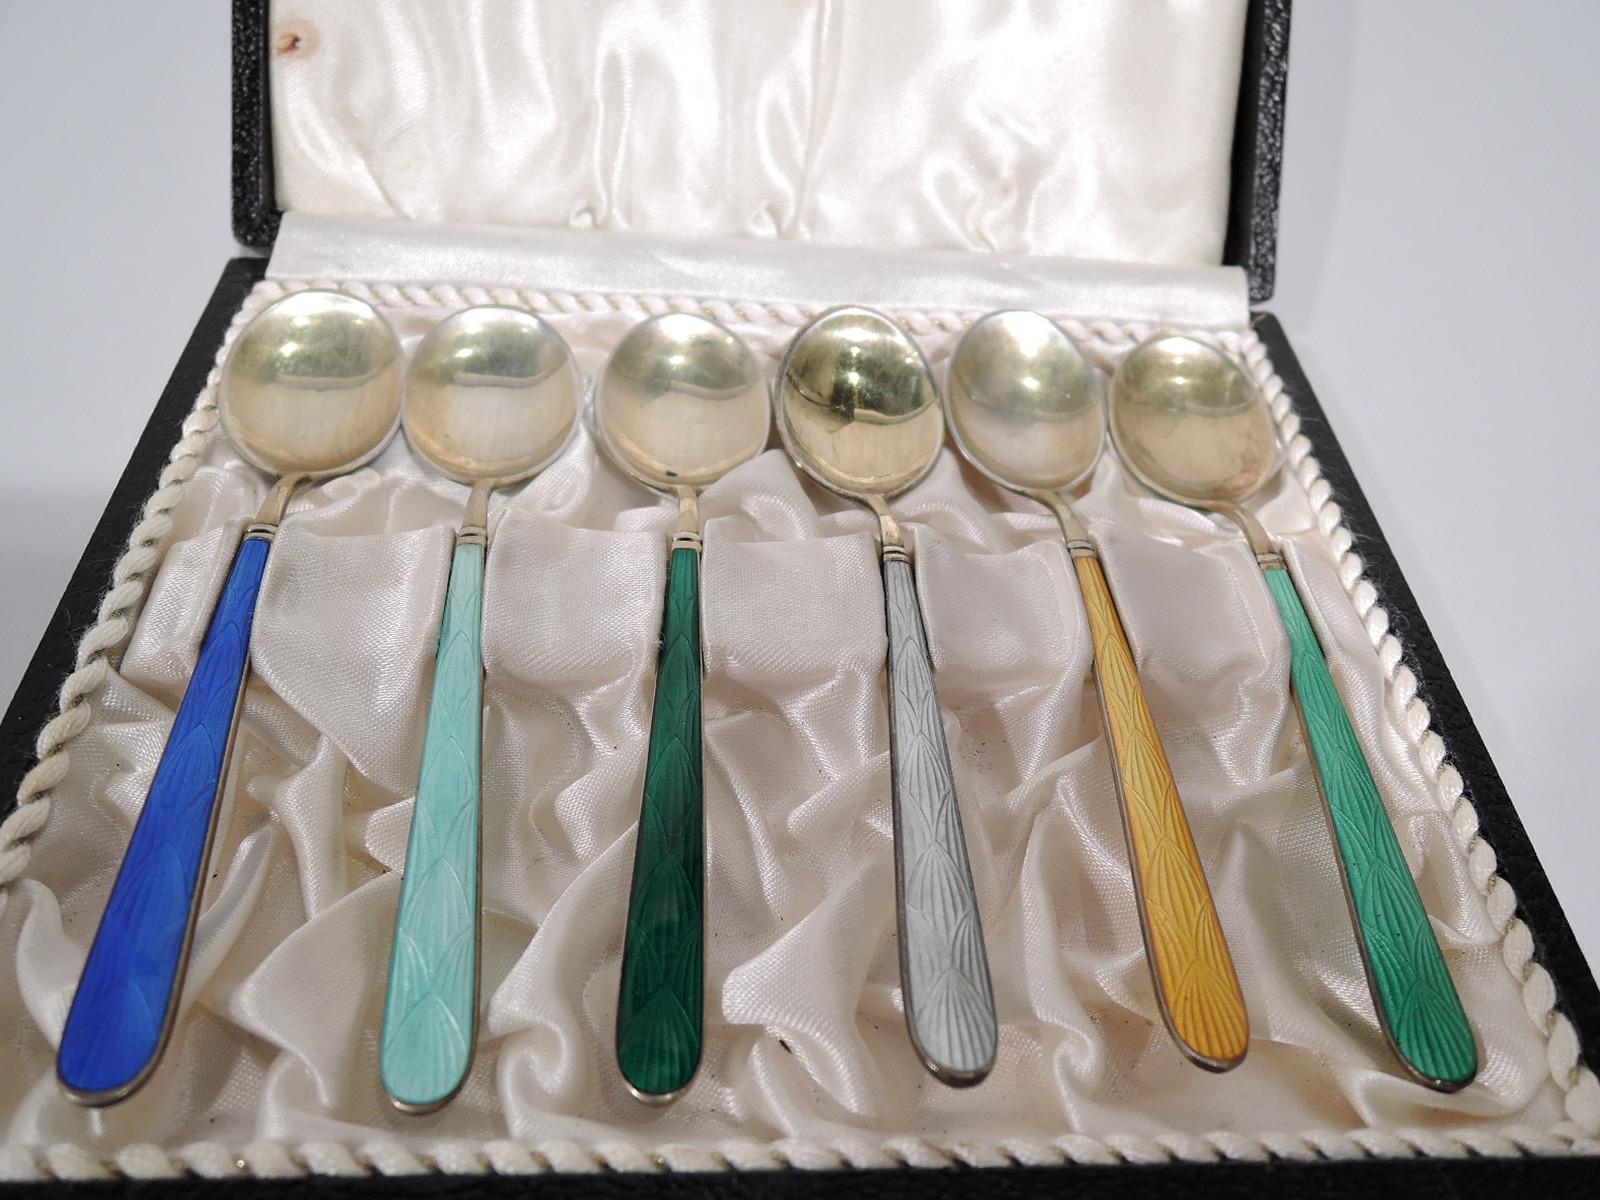 Set of 6 Danish Mid-Century Modern gilt sterling silver and enamel demitasse spoons. Retailed by Cartier in New York. Each tapering shaft with double-sided enamel in imbricated leaf pattern. Bowl oval with same on verso. Each color different. In